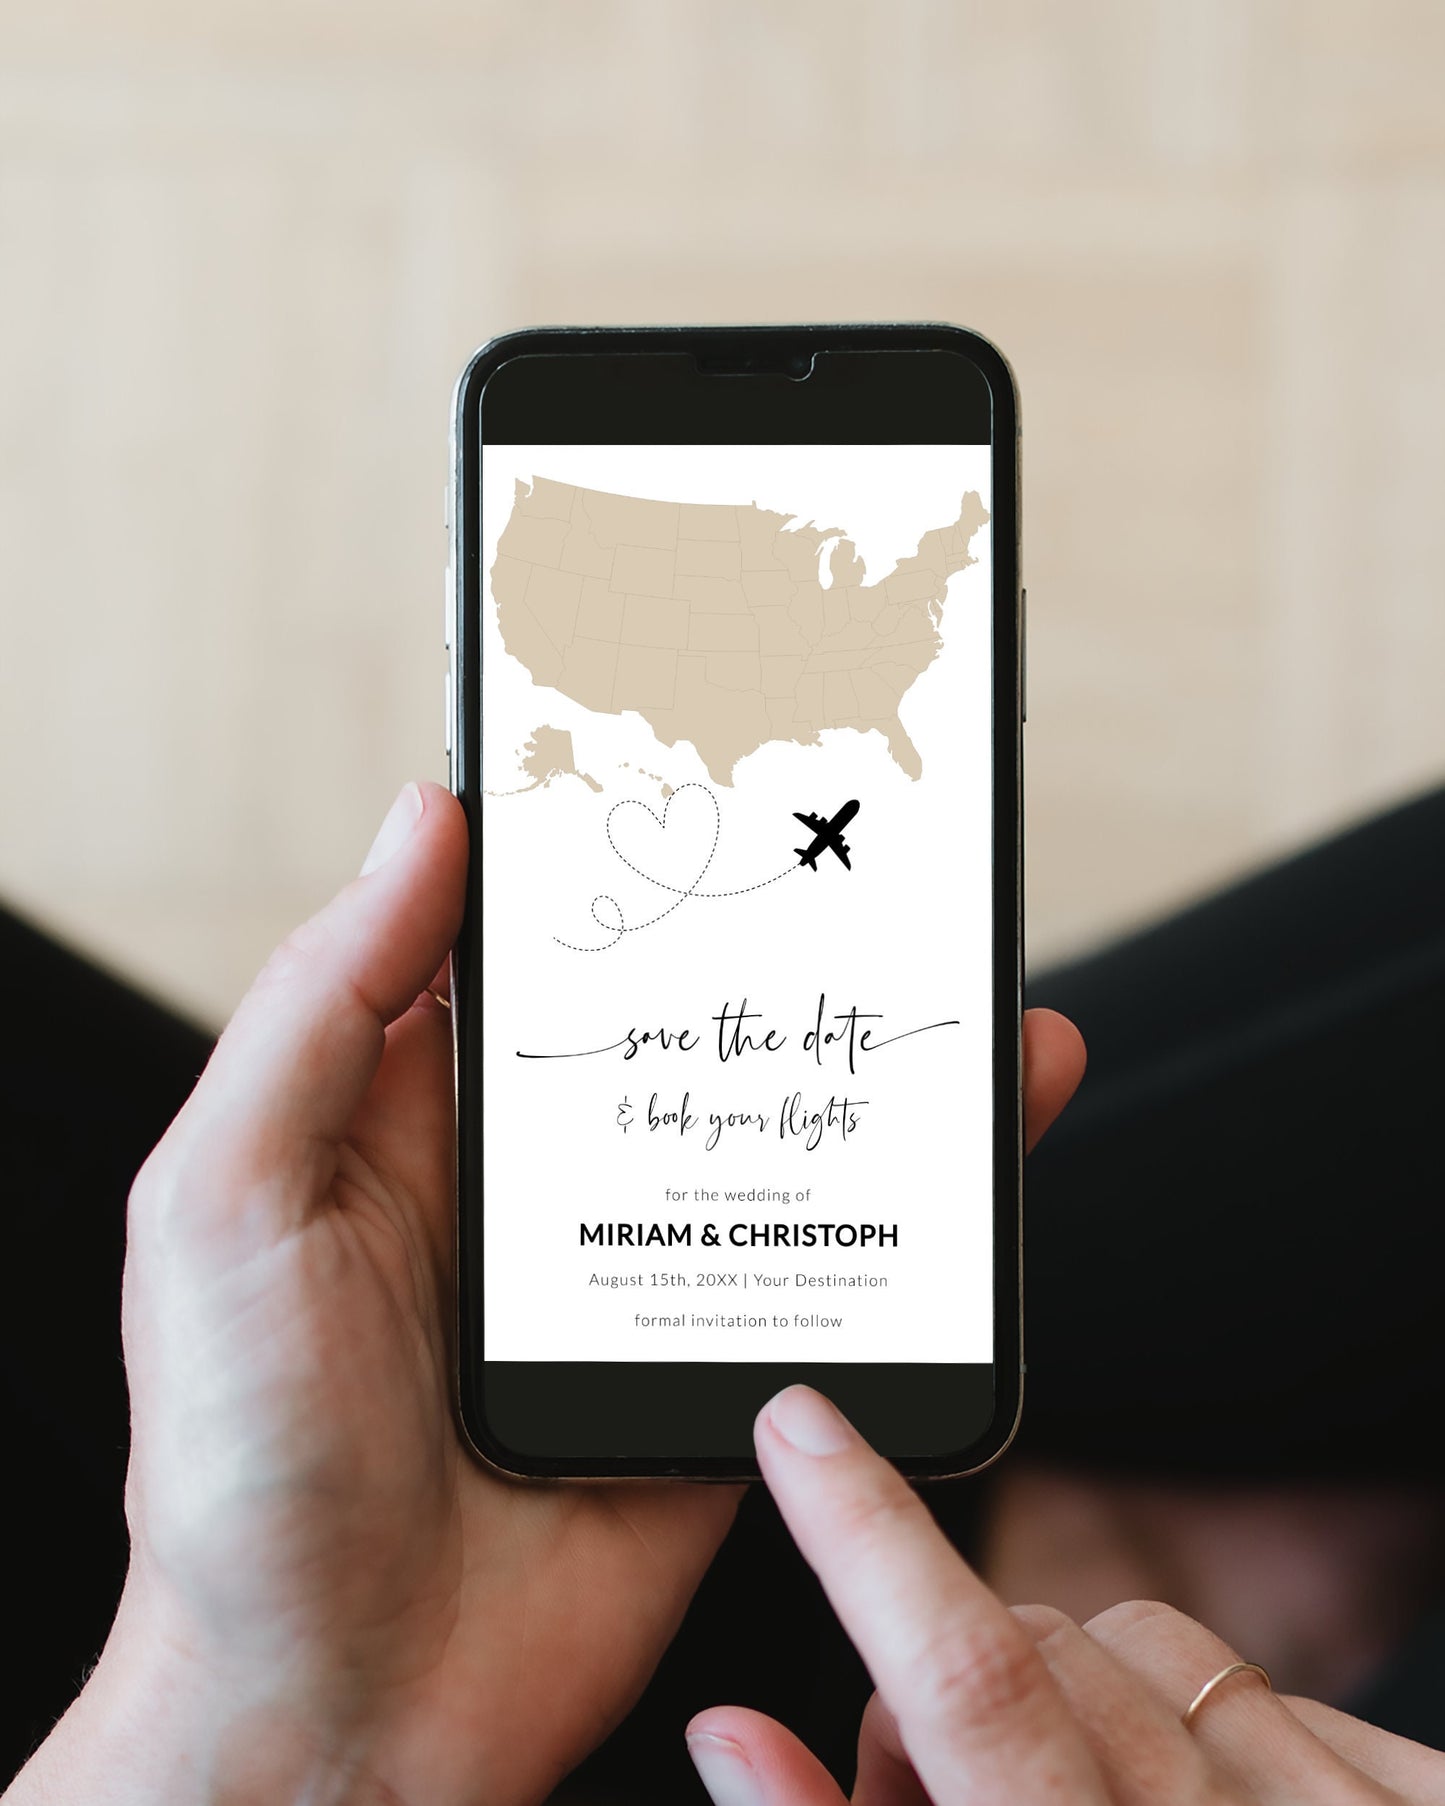 Save the date Destination wedding mobile invitation template to send via text on phone USA Map #072w